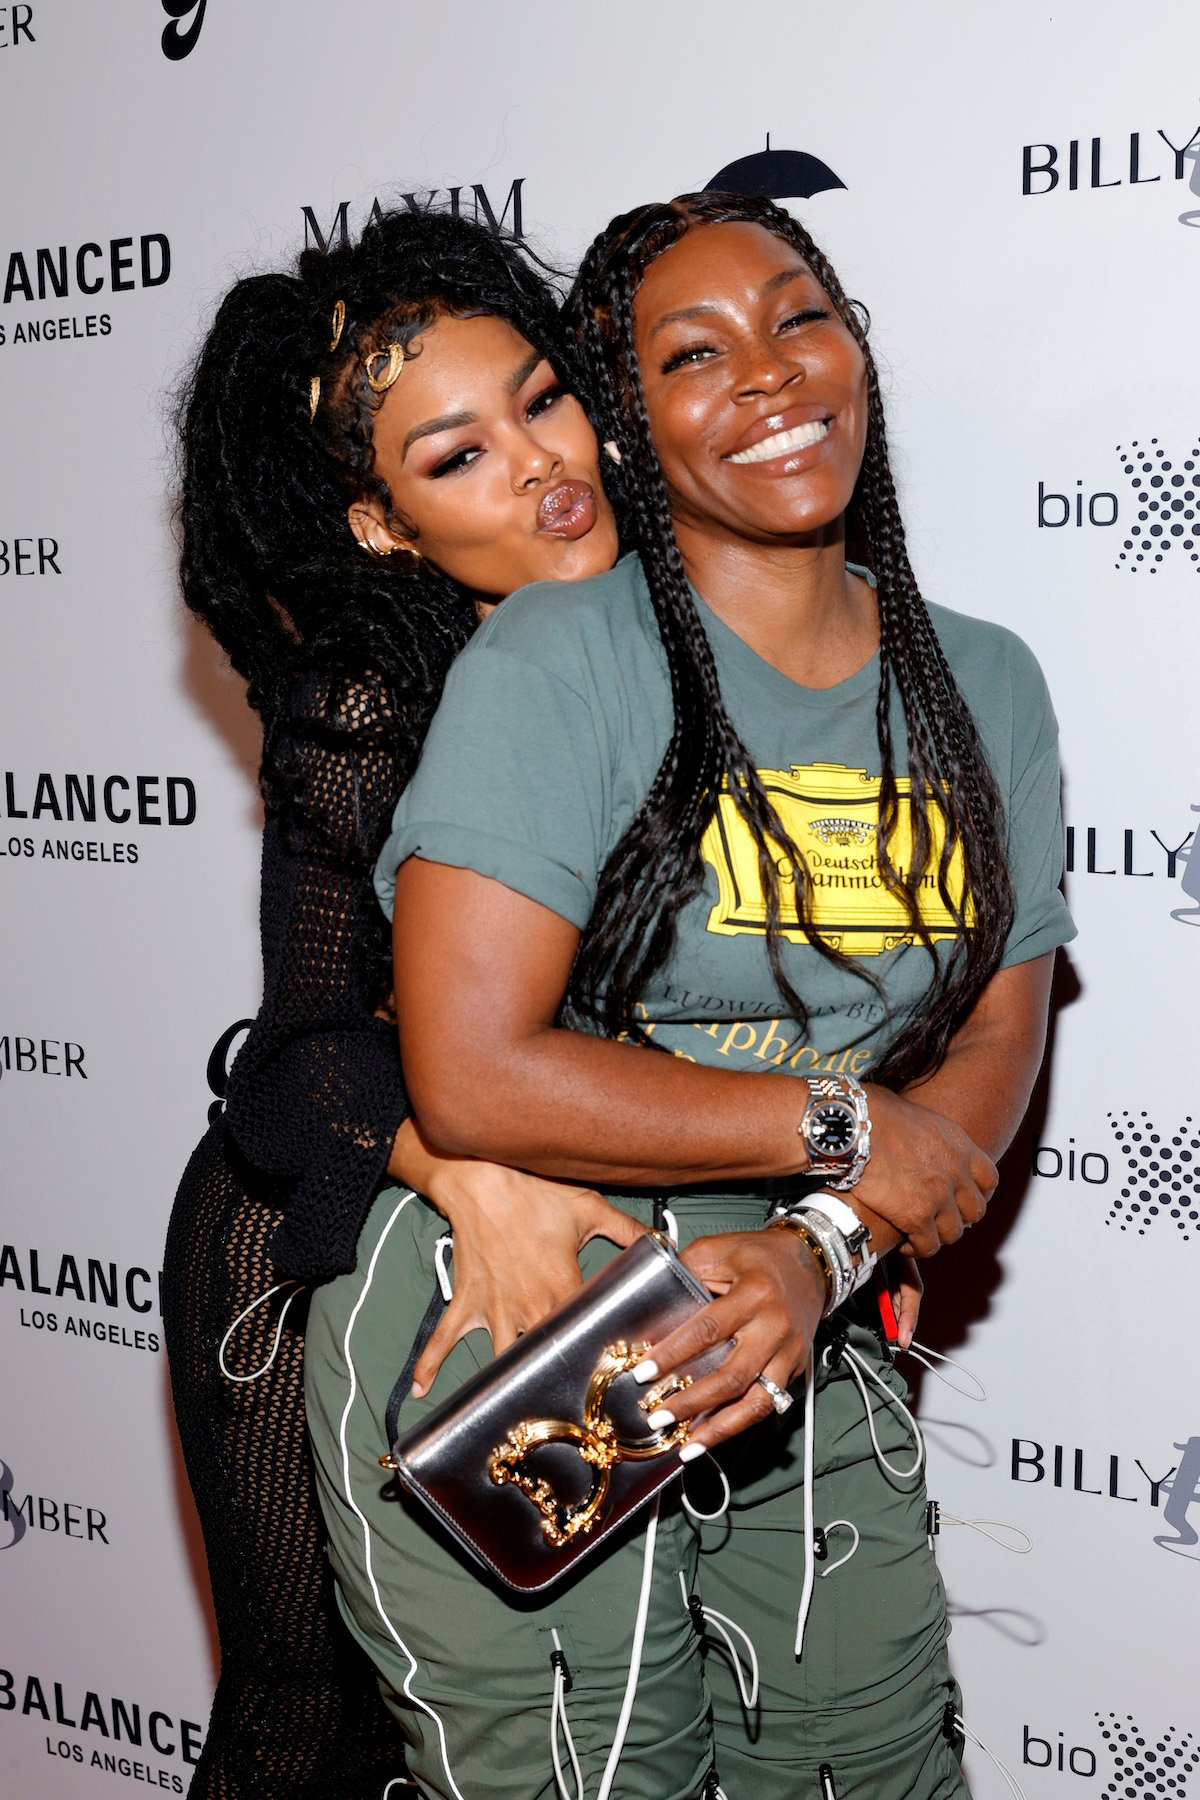 Teyana Taylor and Nikki Taylor attend a Maxim Hot 100 Event celebrating Teyana Taylor, hosted by MADE special, at The Highlight Room on July 13, 2021 in Los Angeles, California.